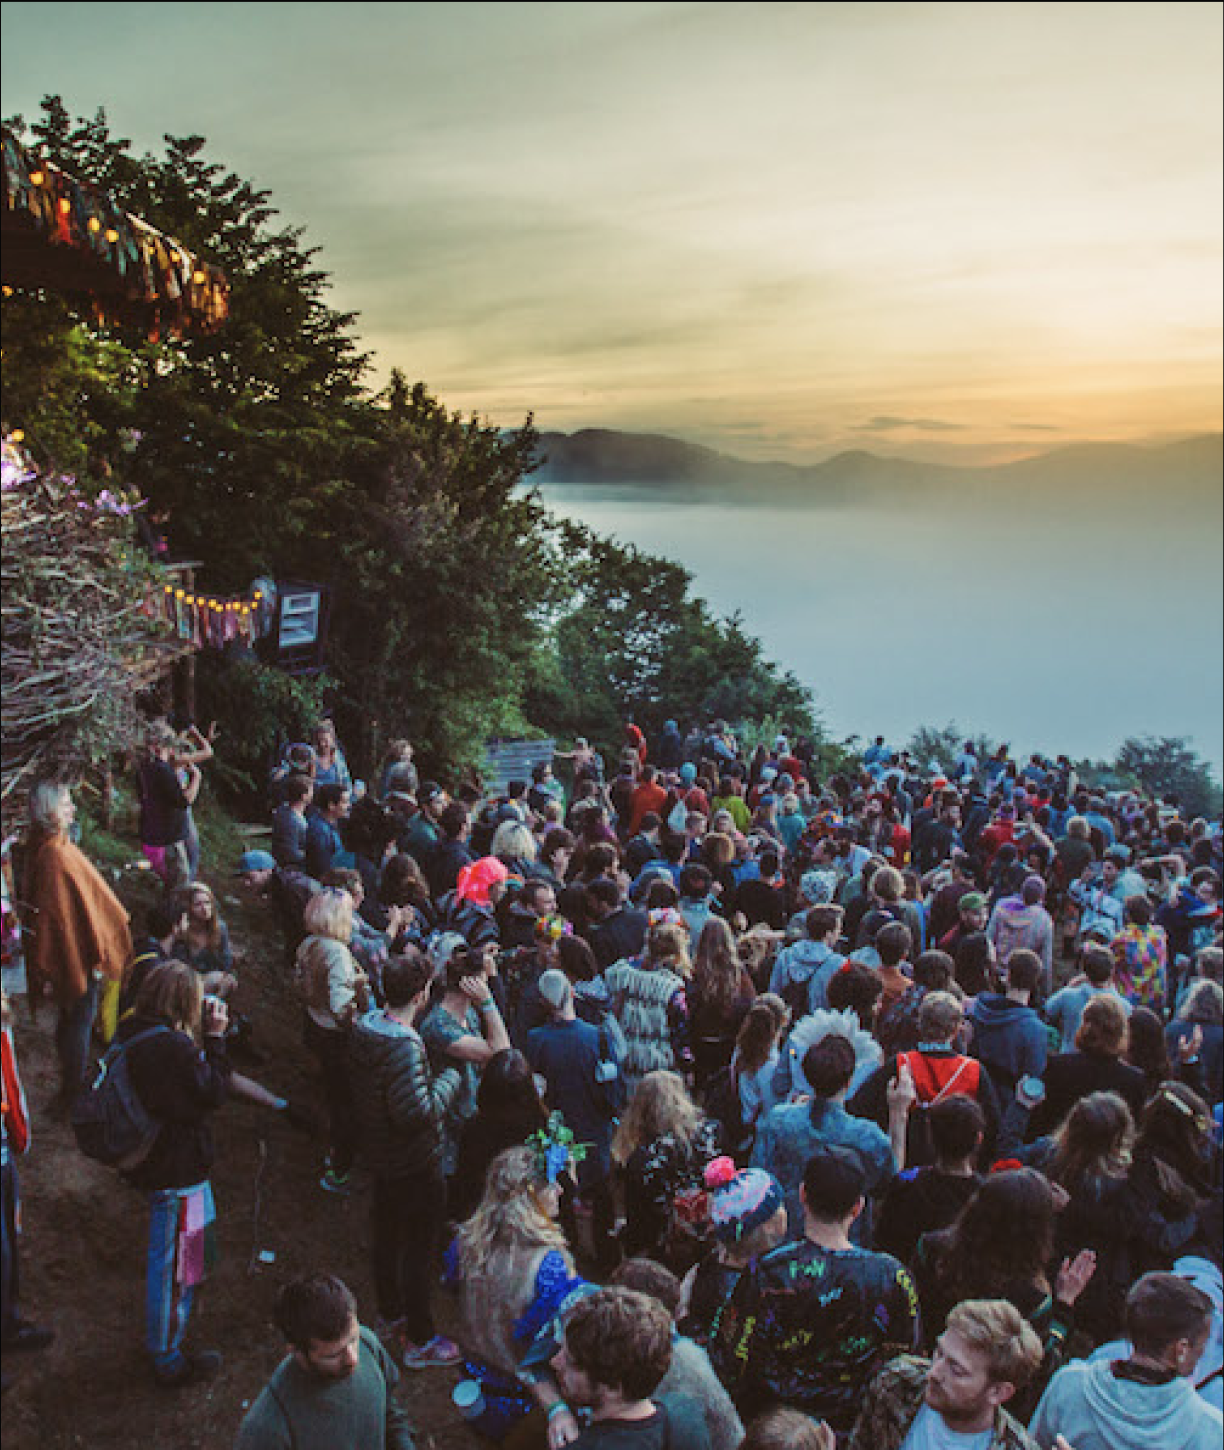 A festival crowd on a hilltop